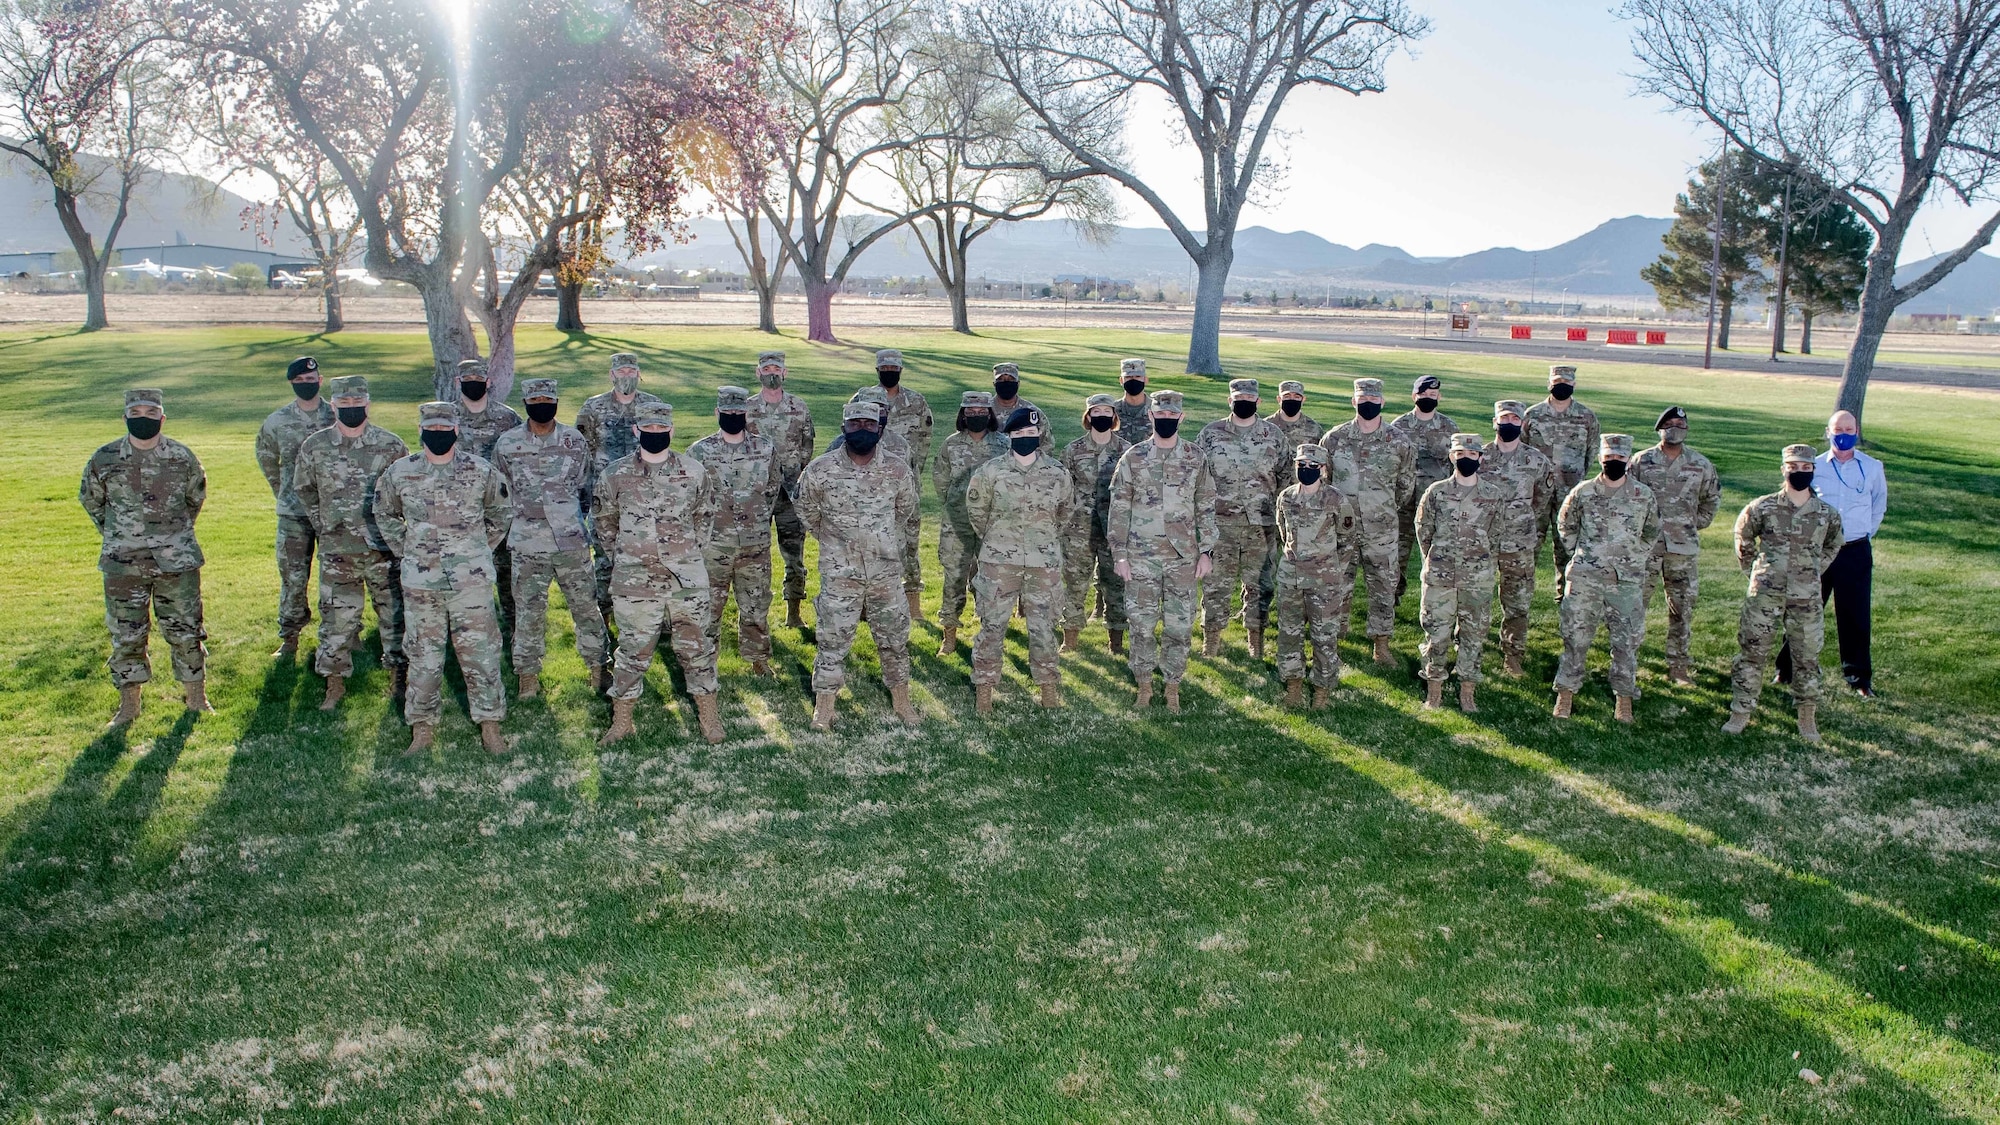 U.S. Air Force officers pose for group photo outdoors.